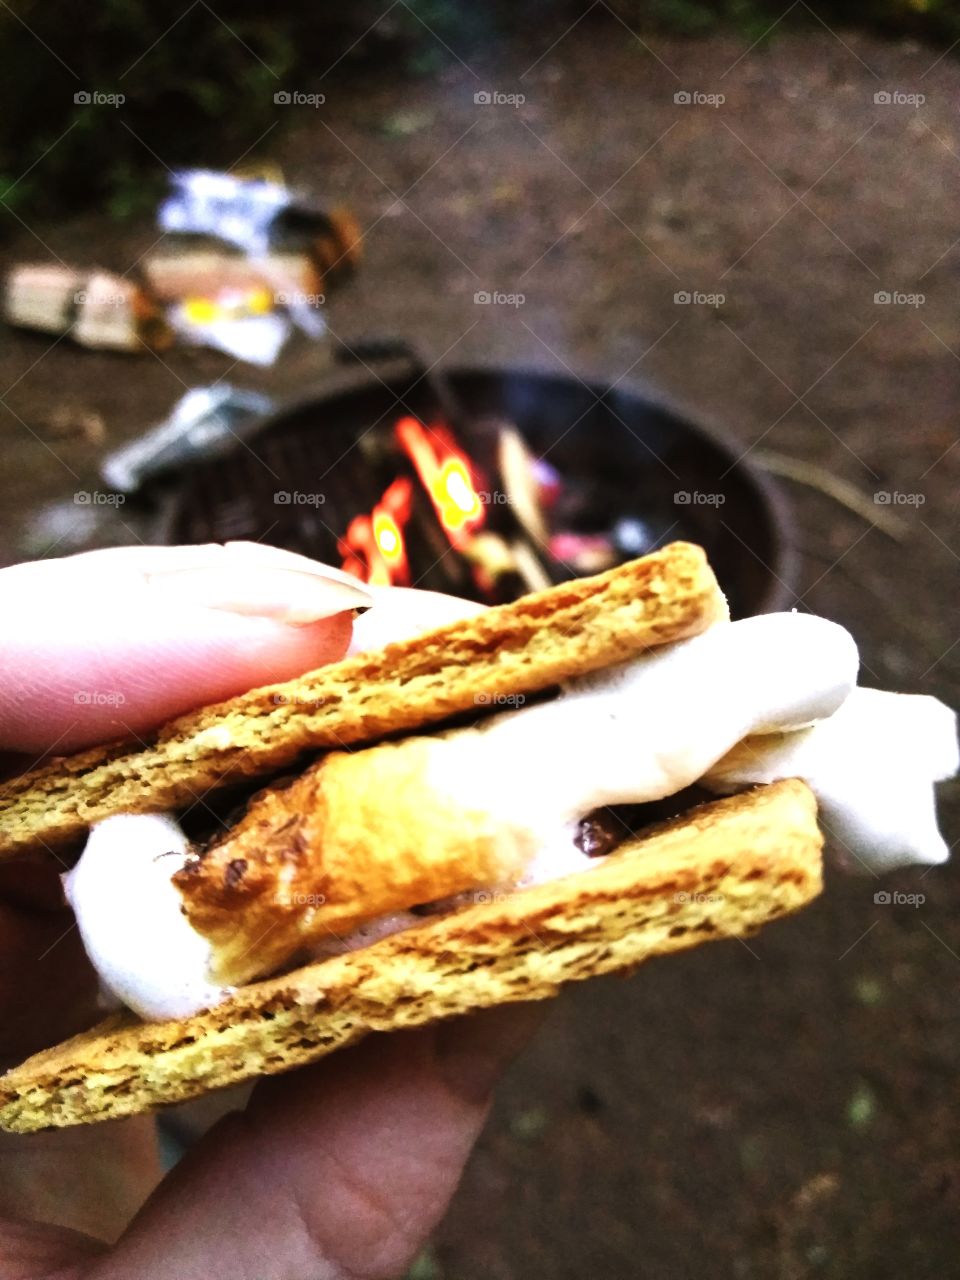 This S'mores for you!